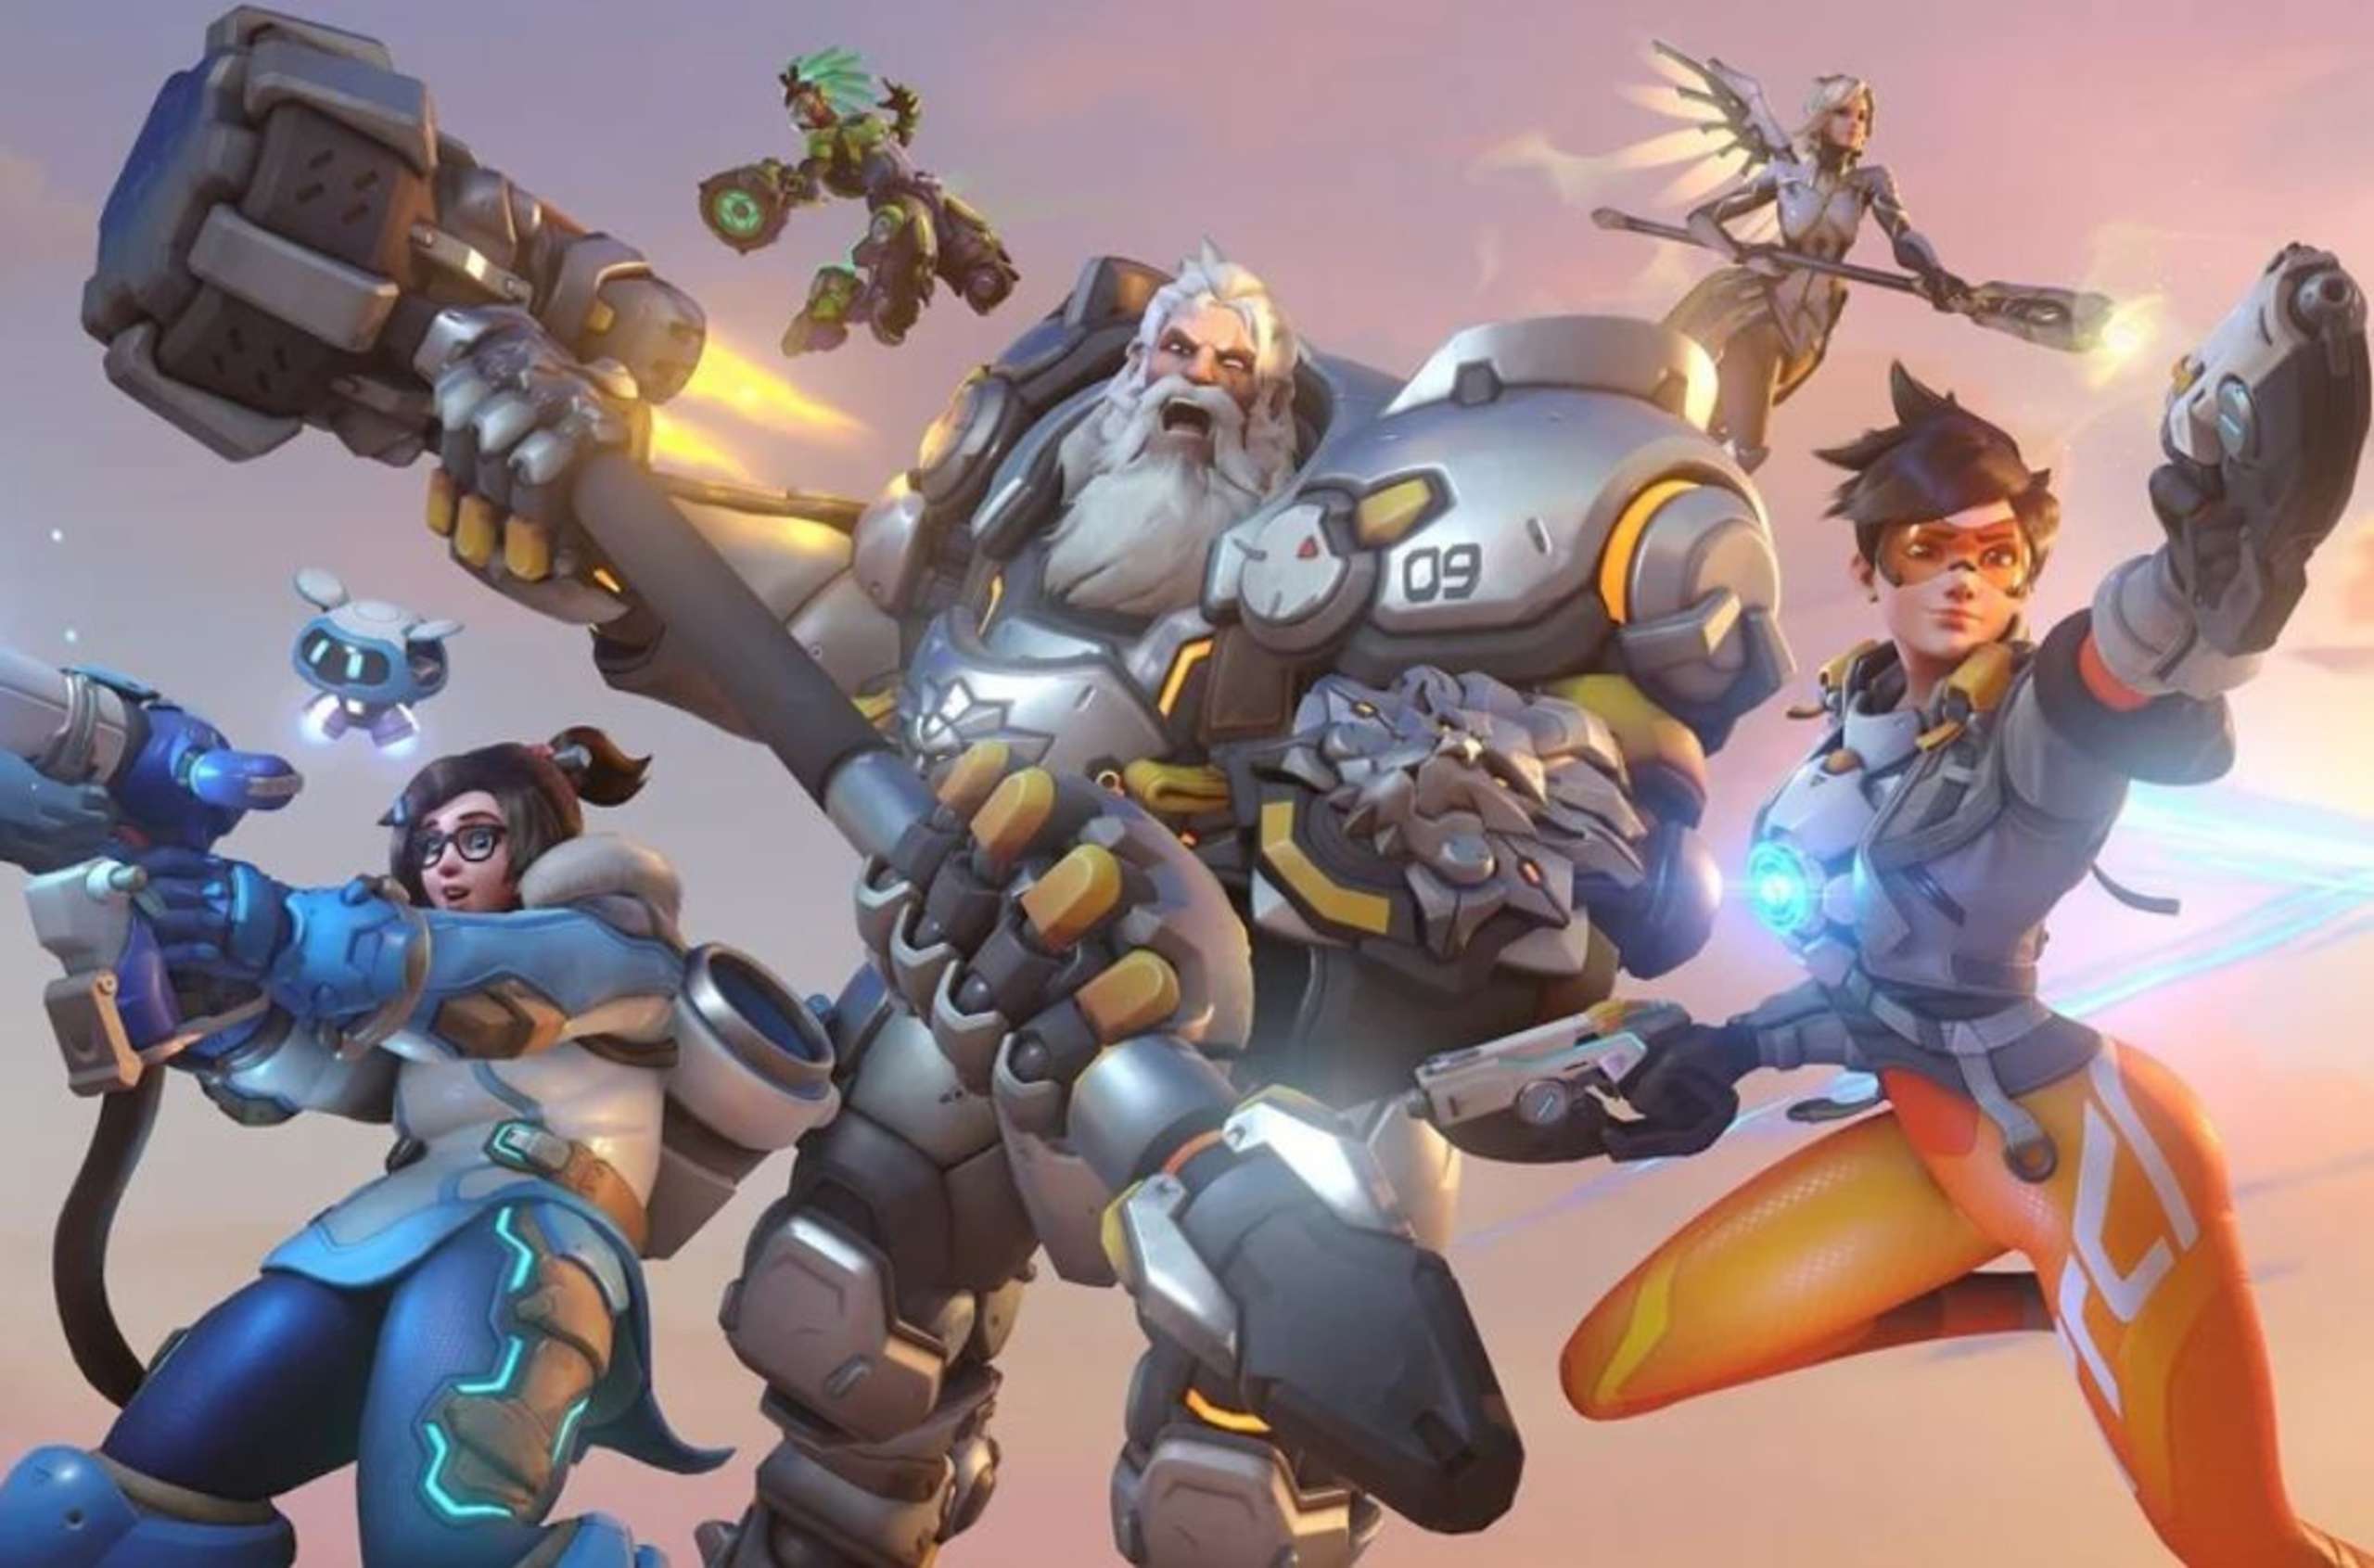 Dedicated Overwatch 2 Gamers Vent Their Anger At Blizzard’s Treatment Of The Game’s Heroes